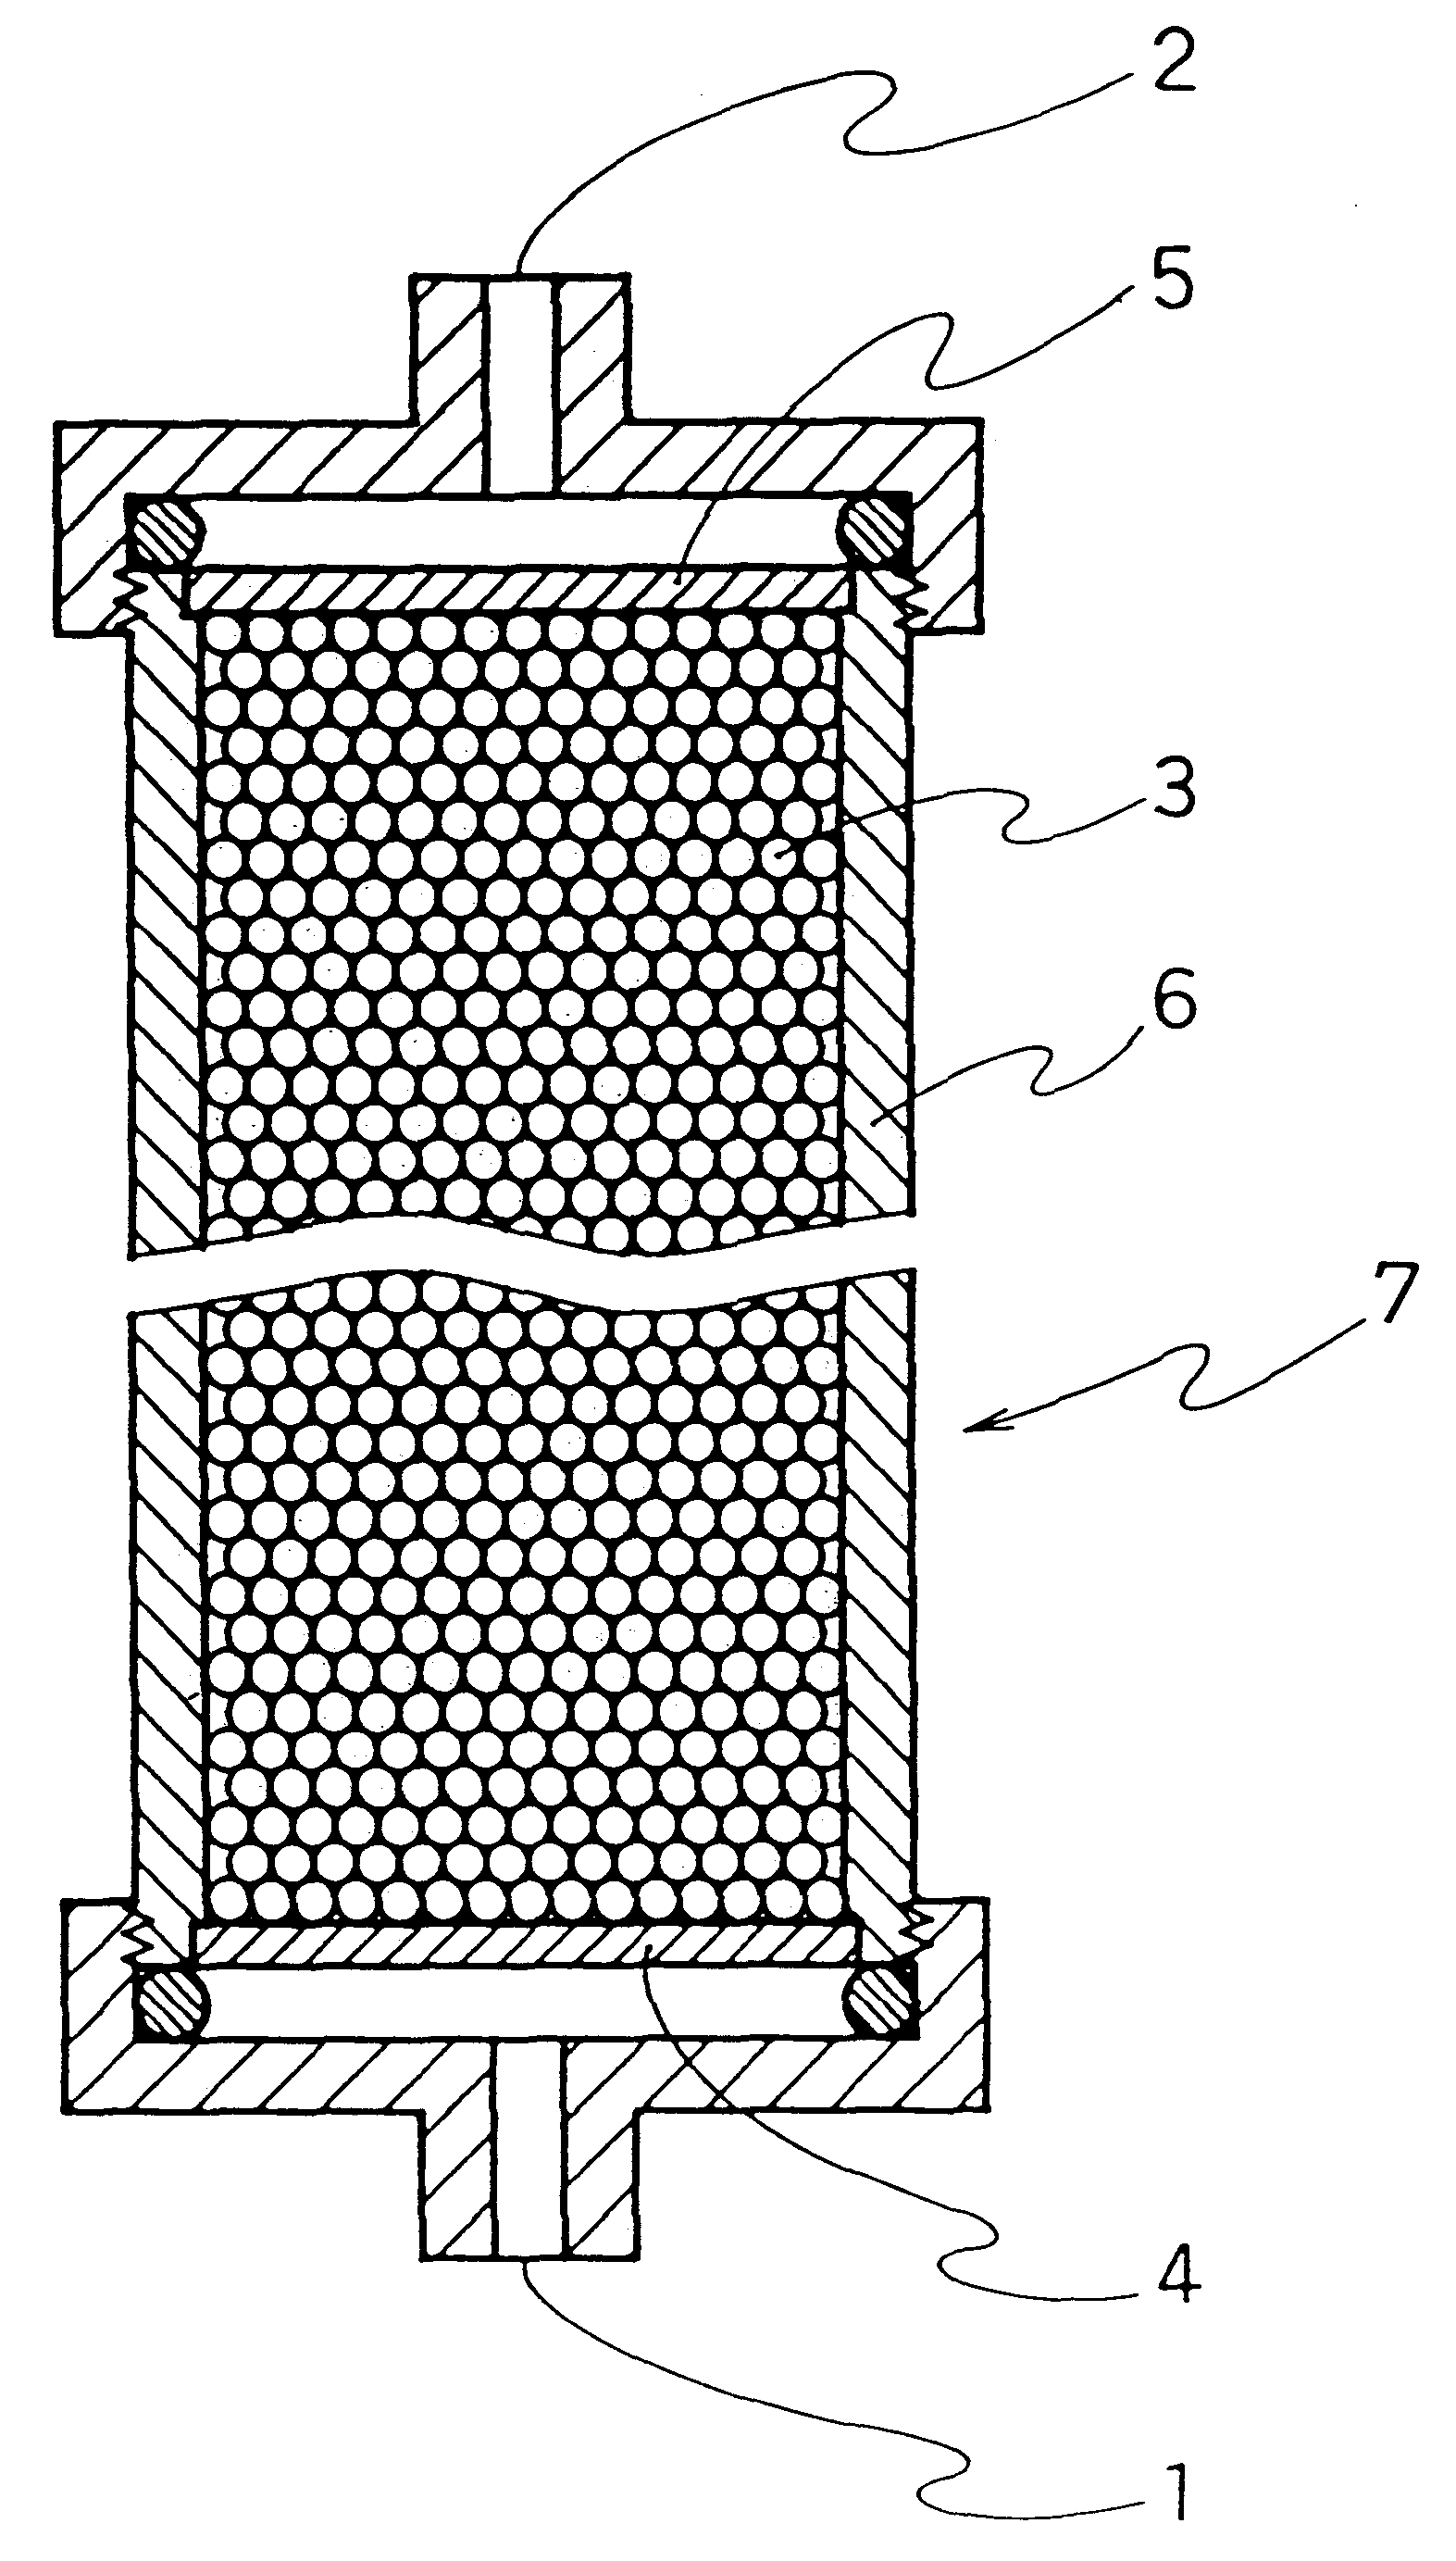 Method for removing toxic shock syndrome toxin-1 in body fluids by adsorption